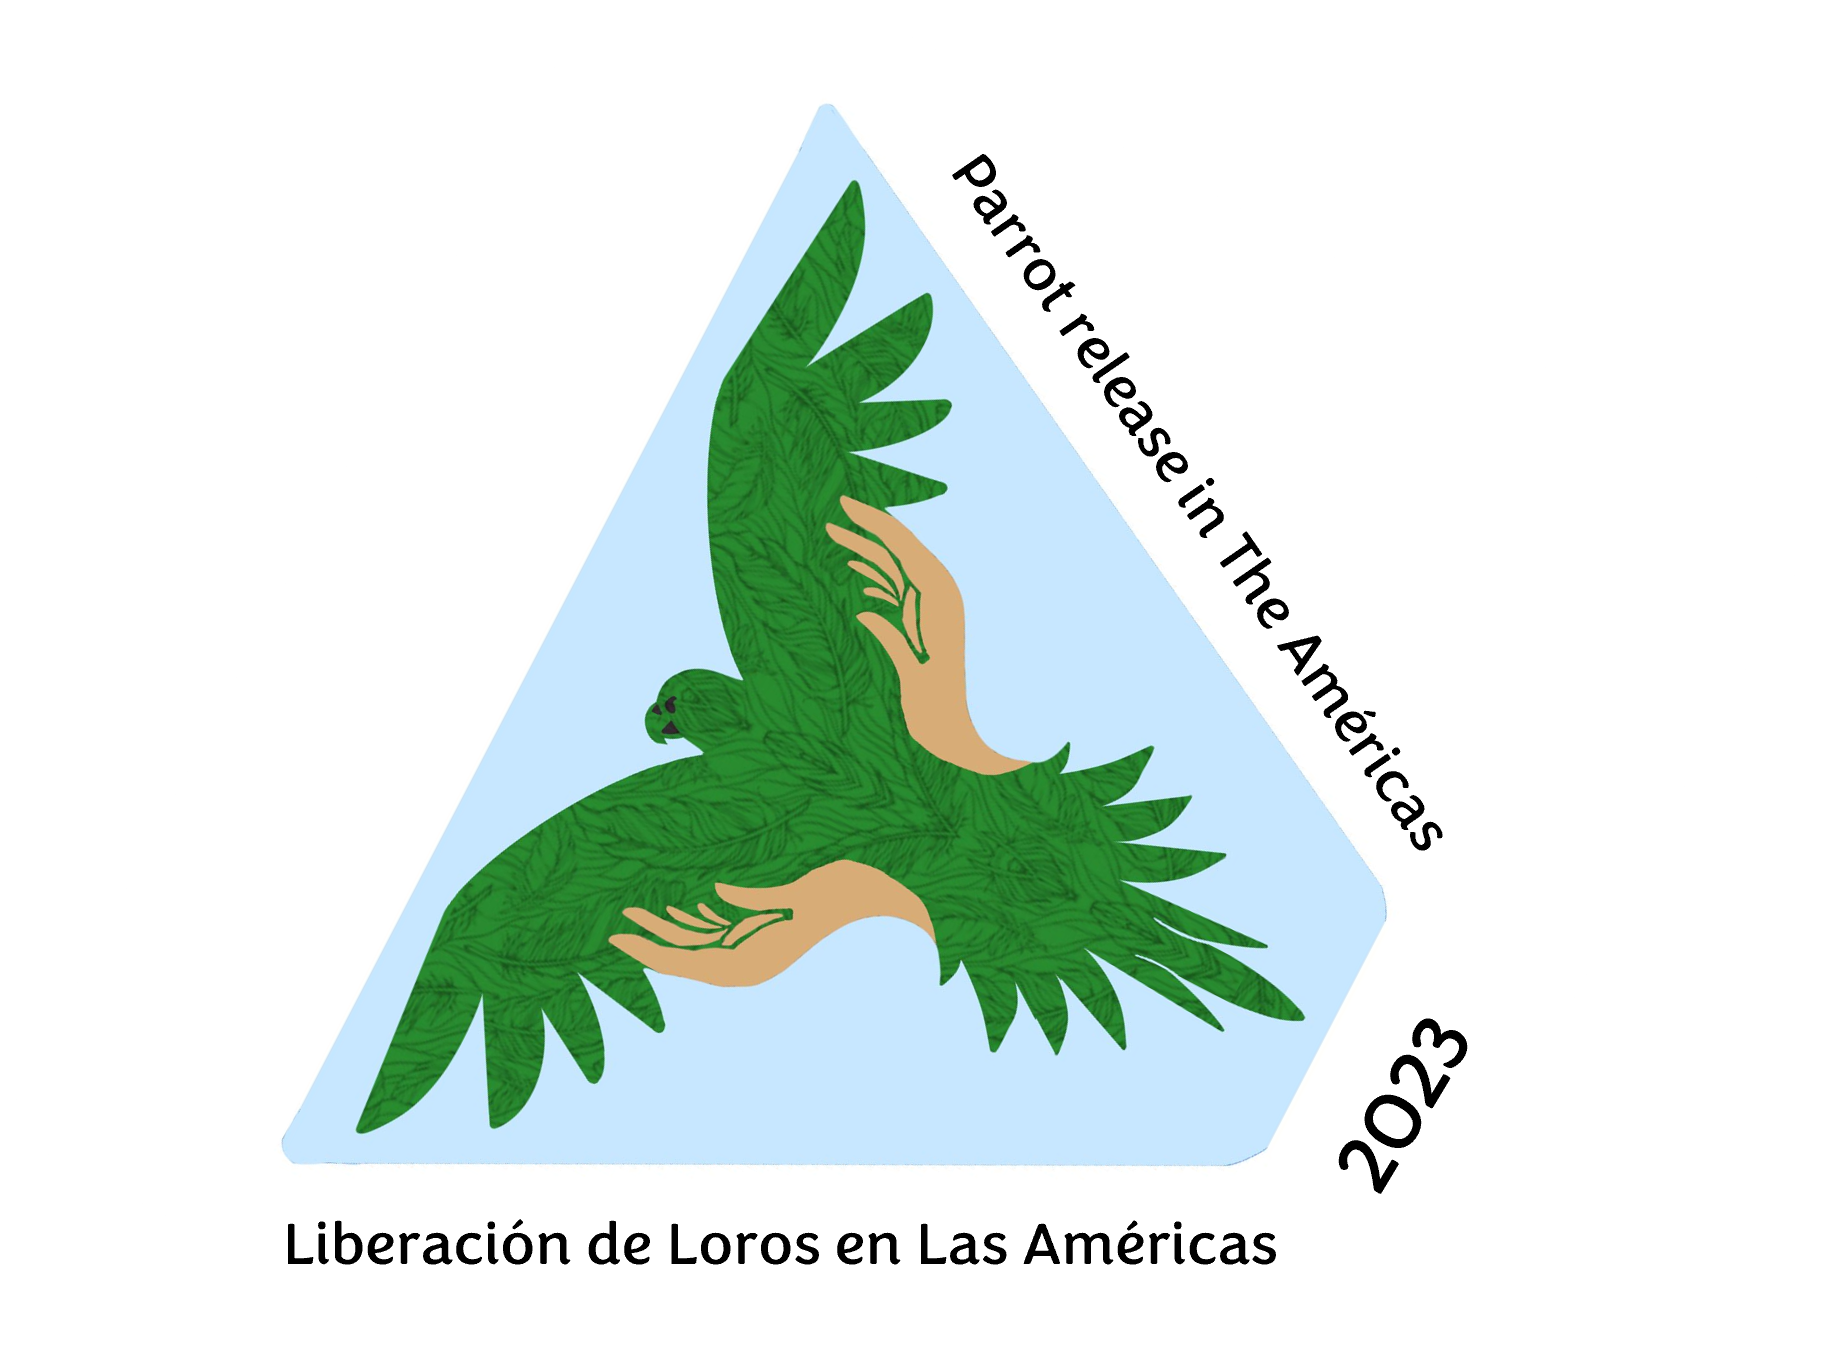 Parrot Release in The Americas